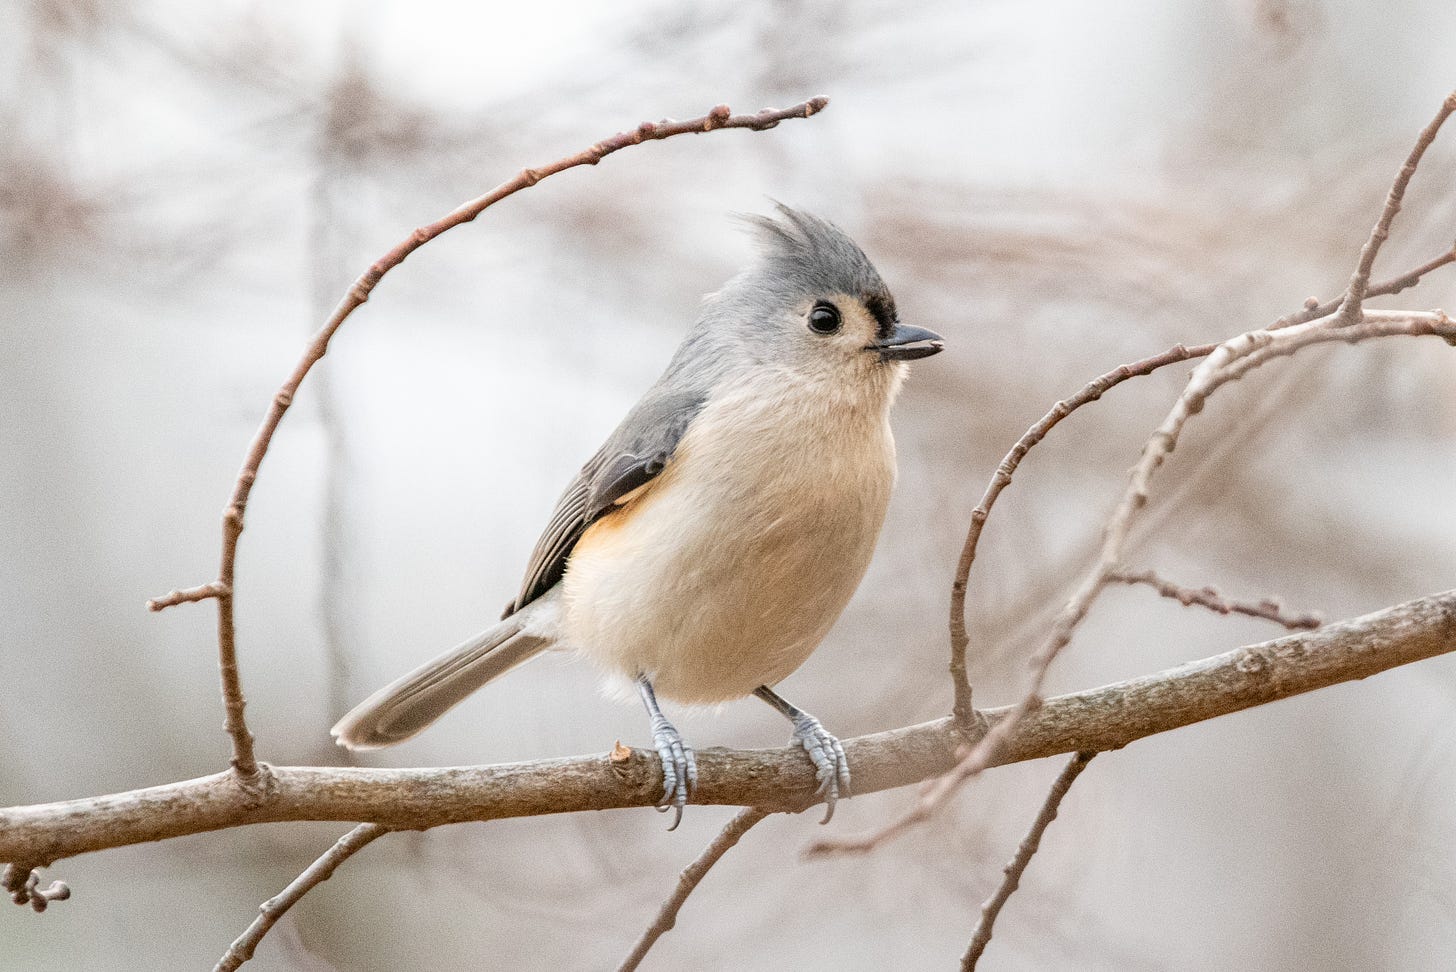 A perched tufted titmouse, with a small seed in its beak